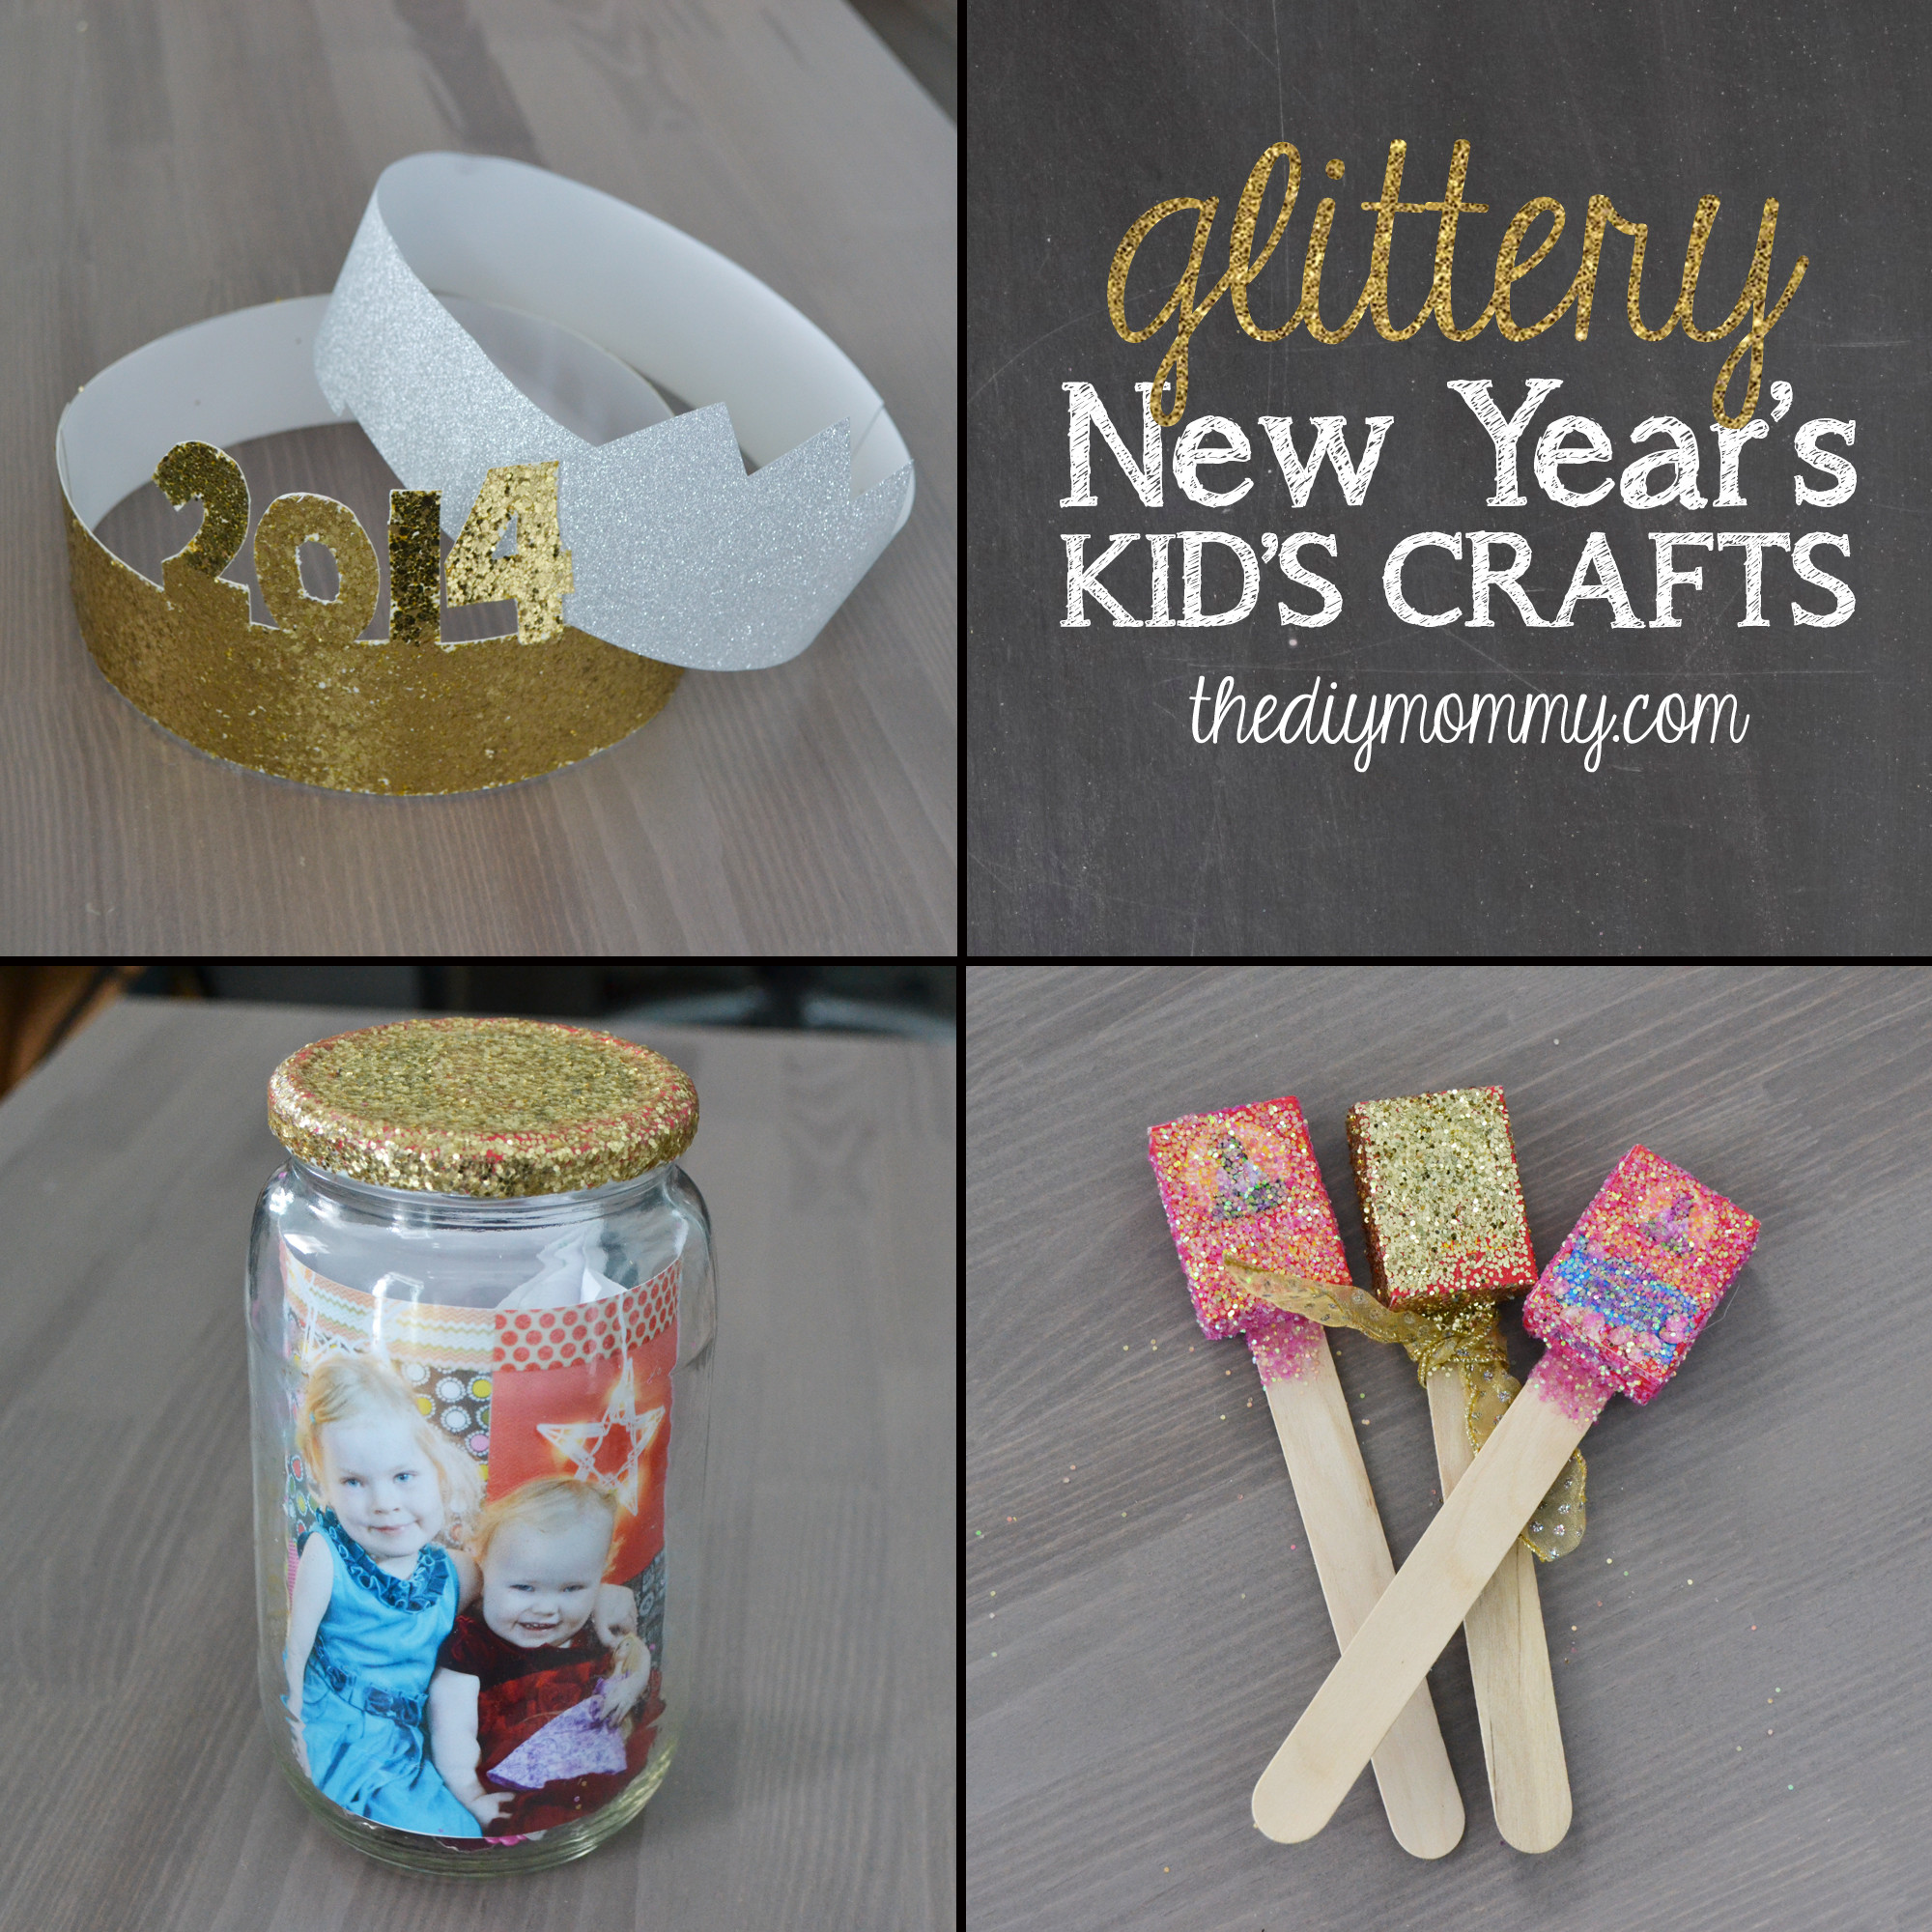 DIY Craft Projects For Kids
 Make Glittery New Year’s Kid’s Crafts – The News